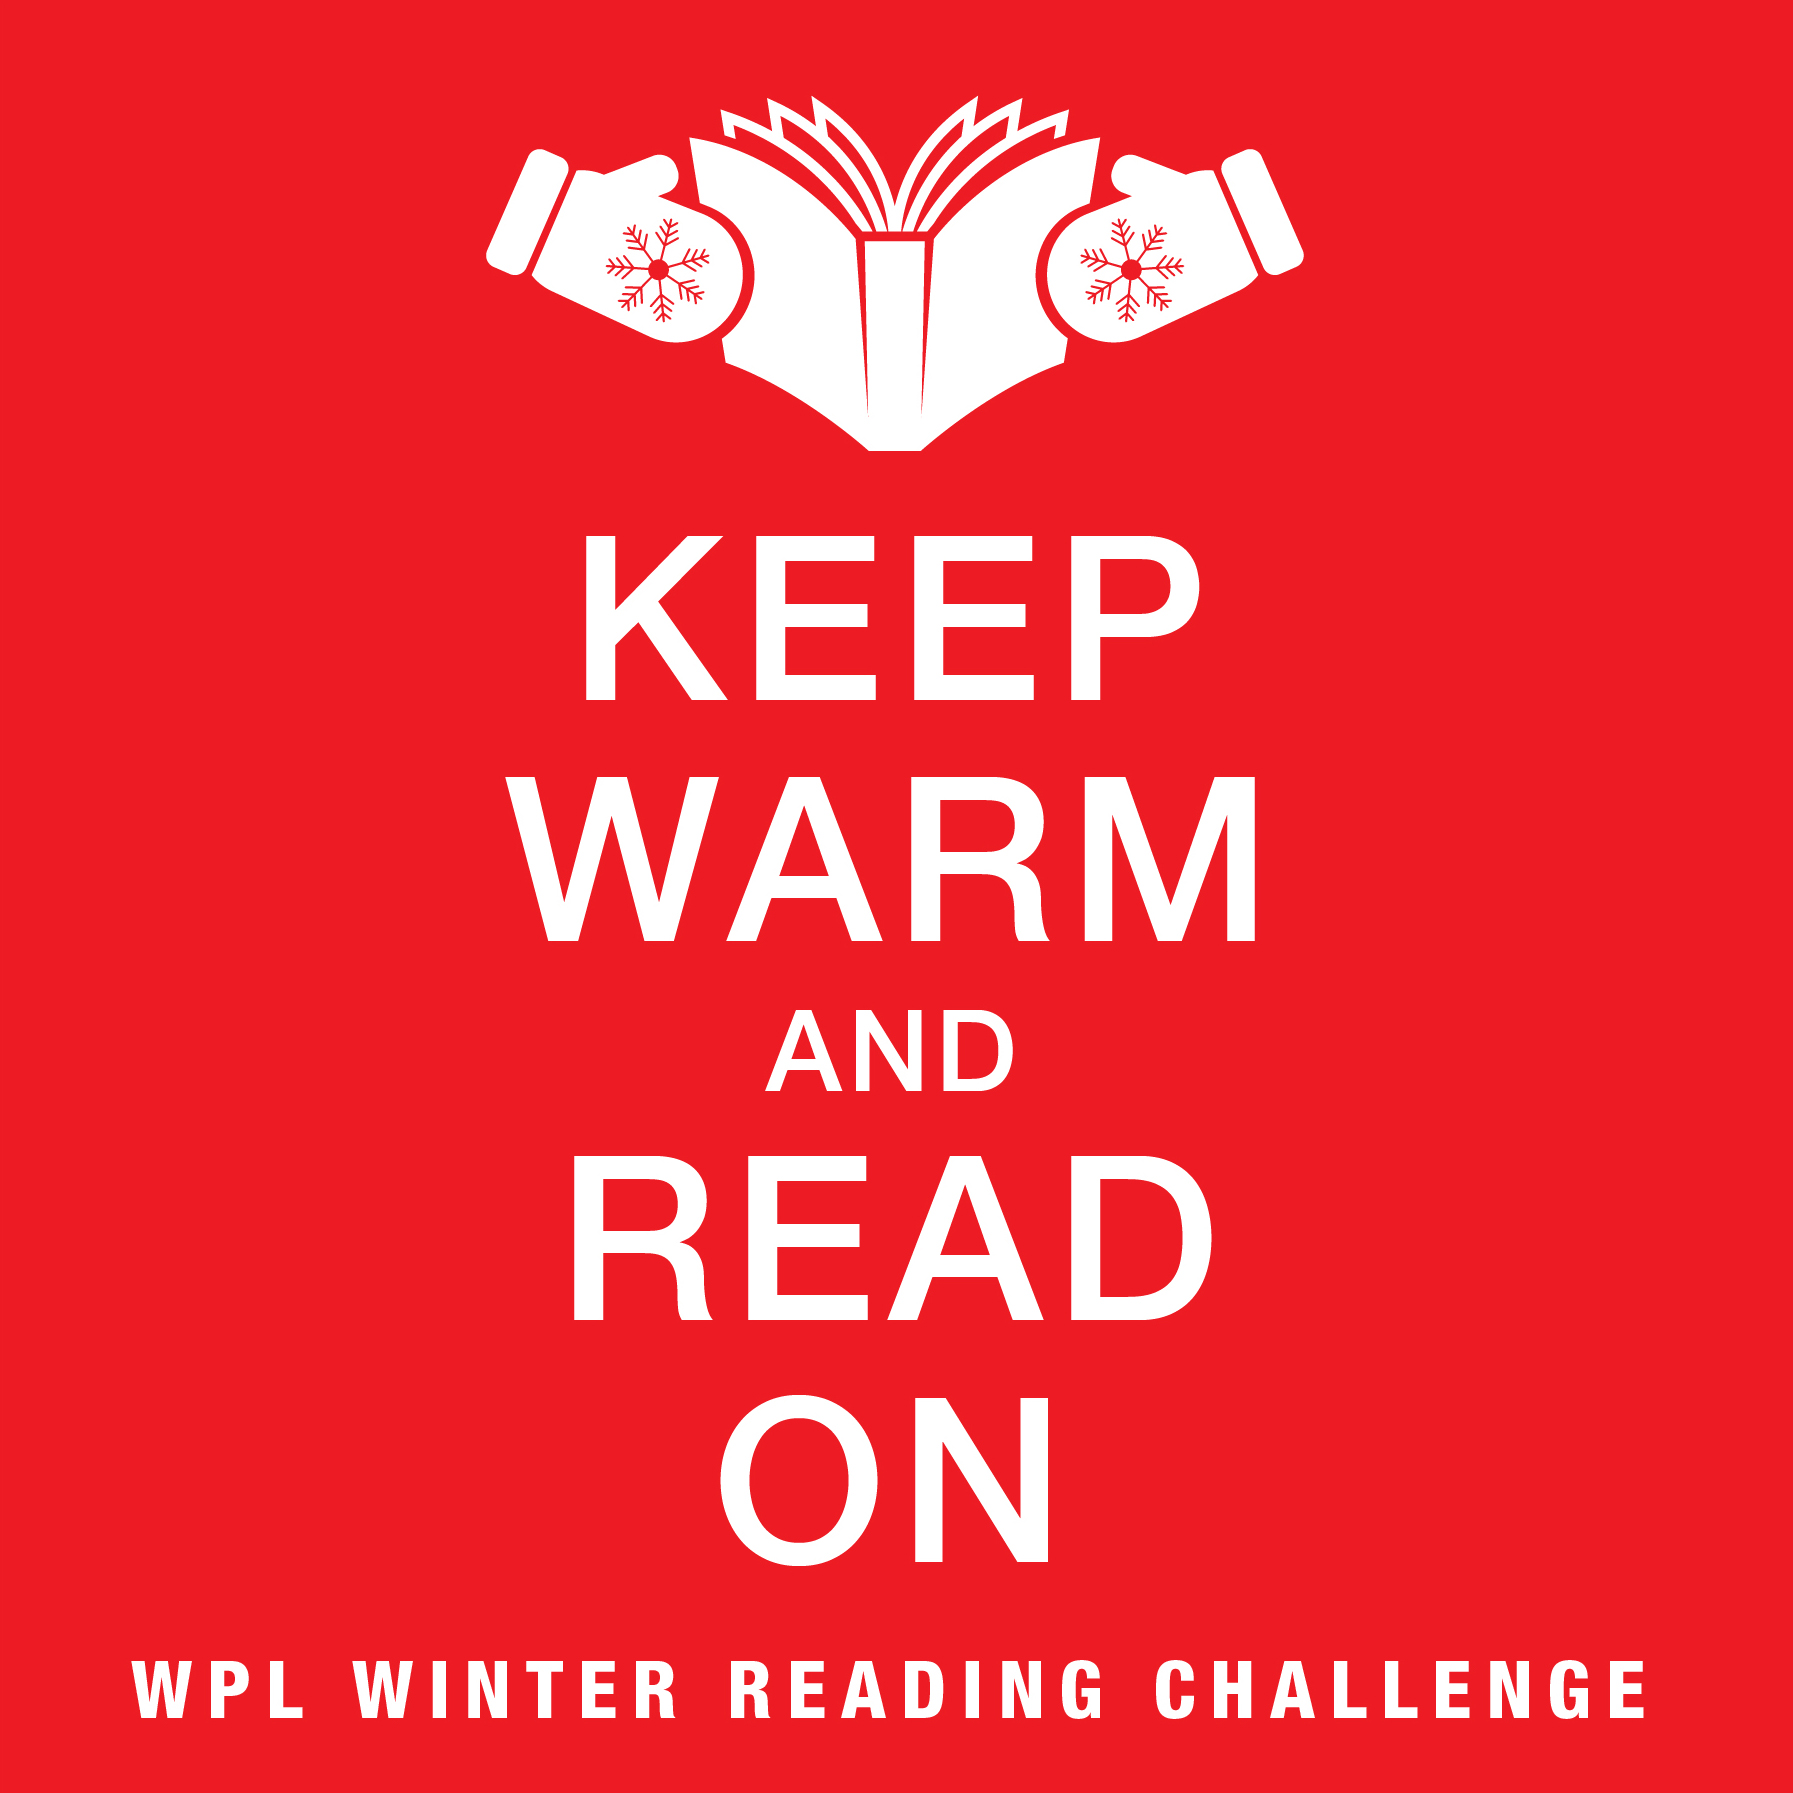 "Keep Warm and Read on" text with mittens and book icon above 